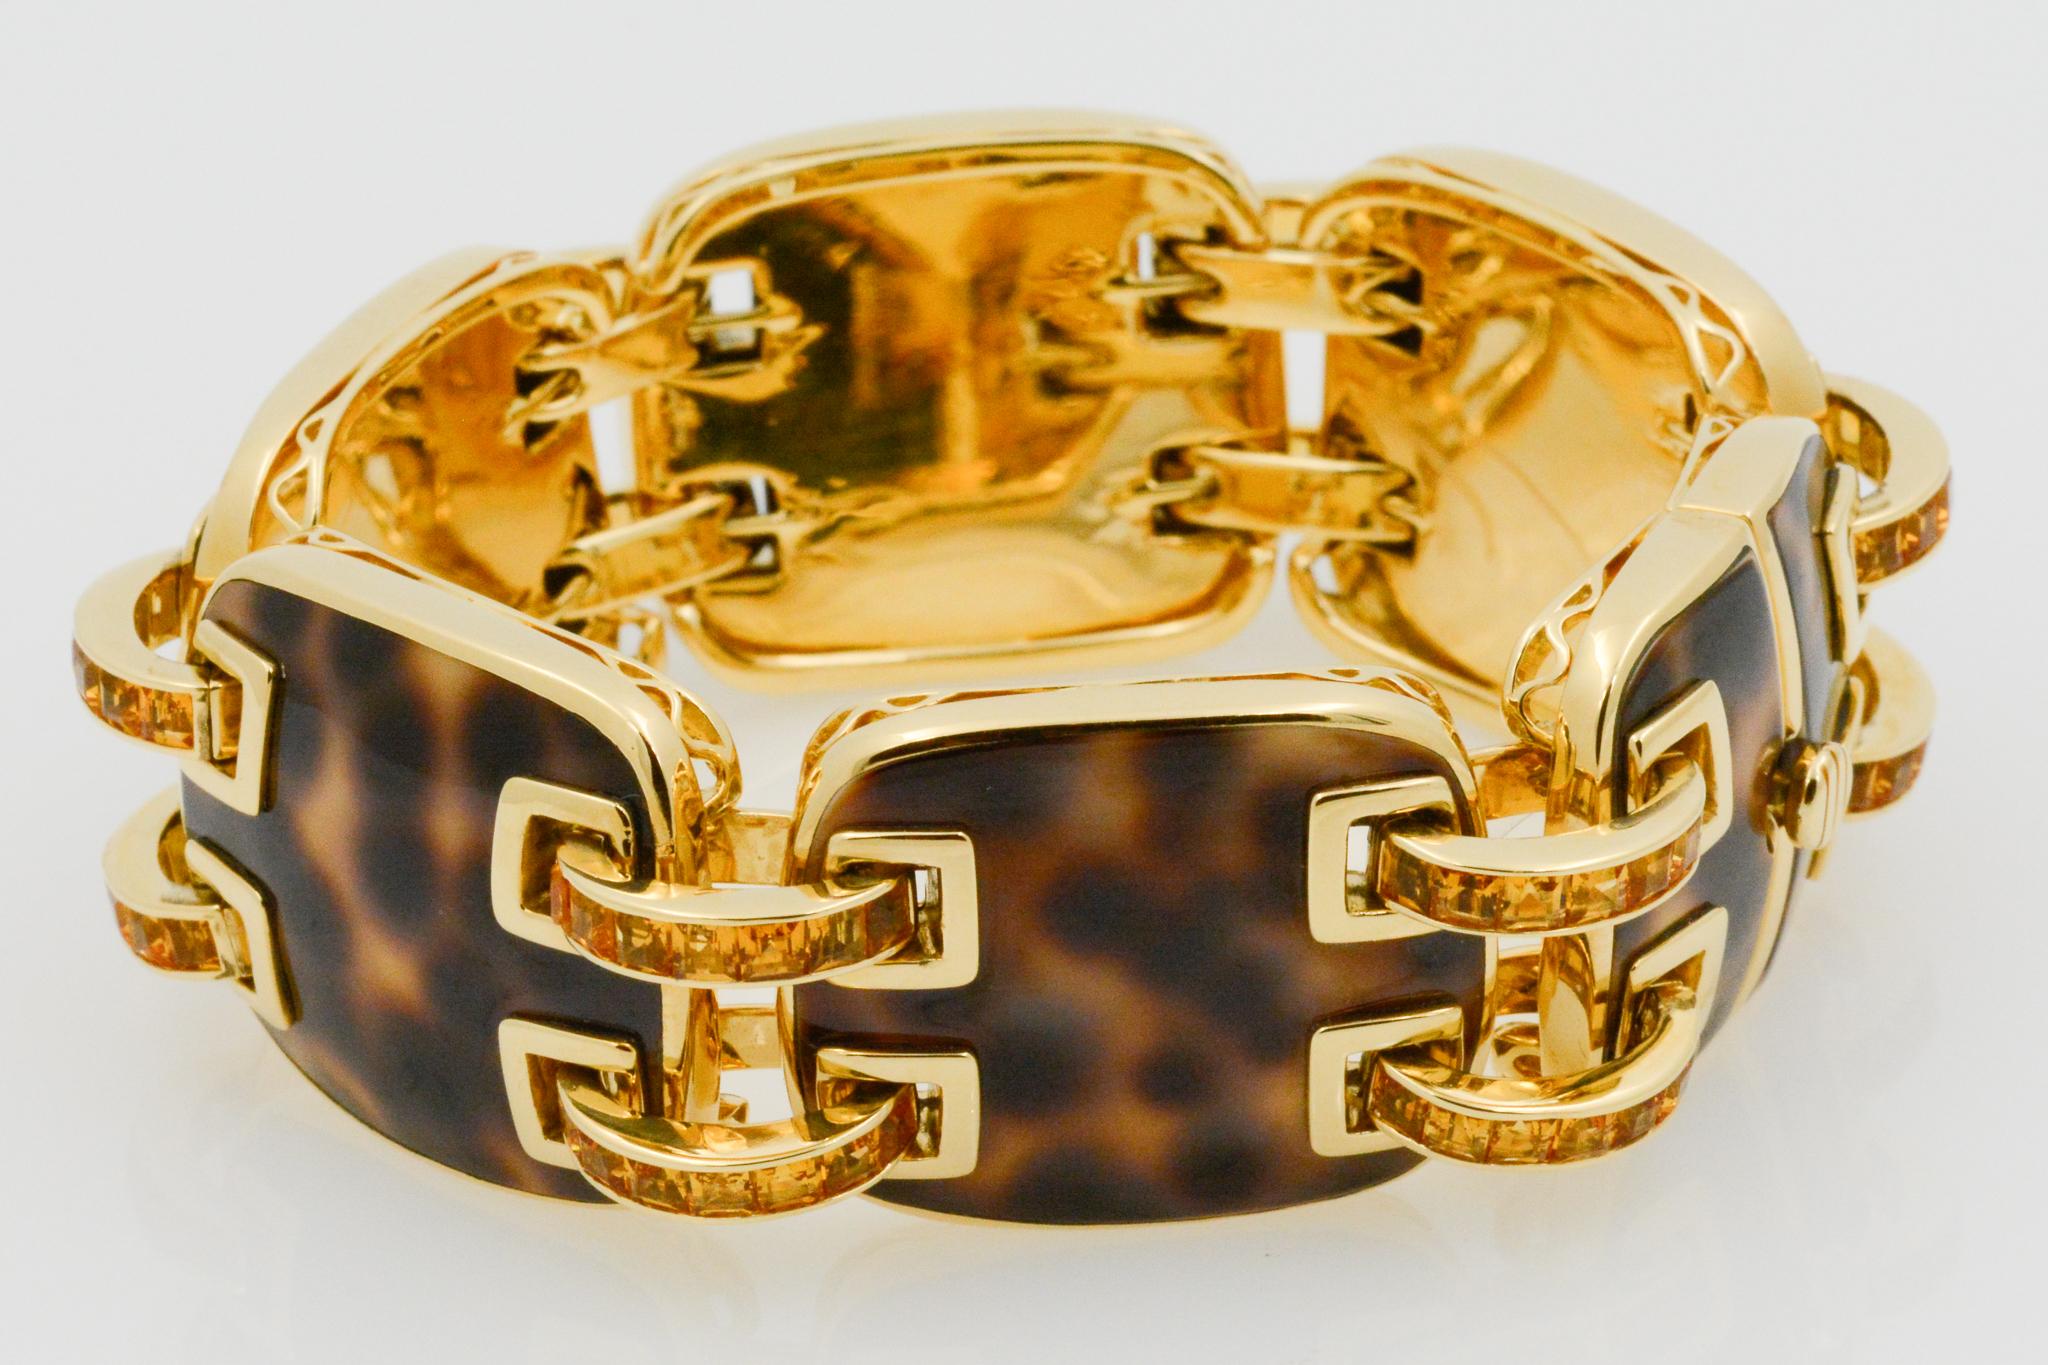 From Seaman Schepps, this 18k yellow gold Cowrie Ponte bracelet features five full square cushion shape cowrie links and two halves forming the clasp. The bracelet features 12 double connector bars, each channel is set with square faceted baguette